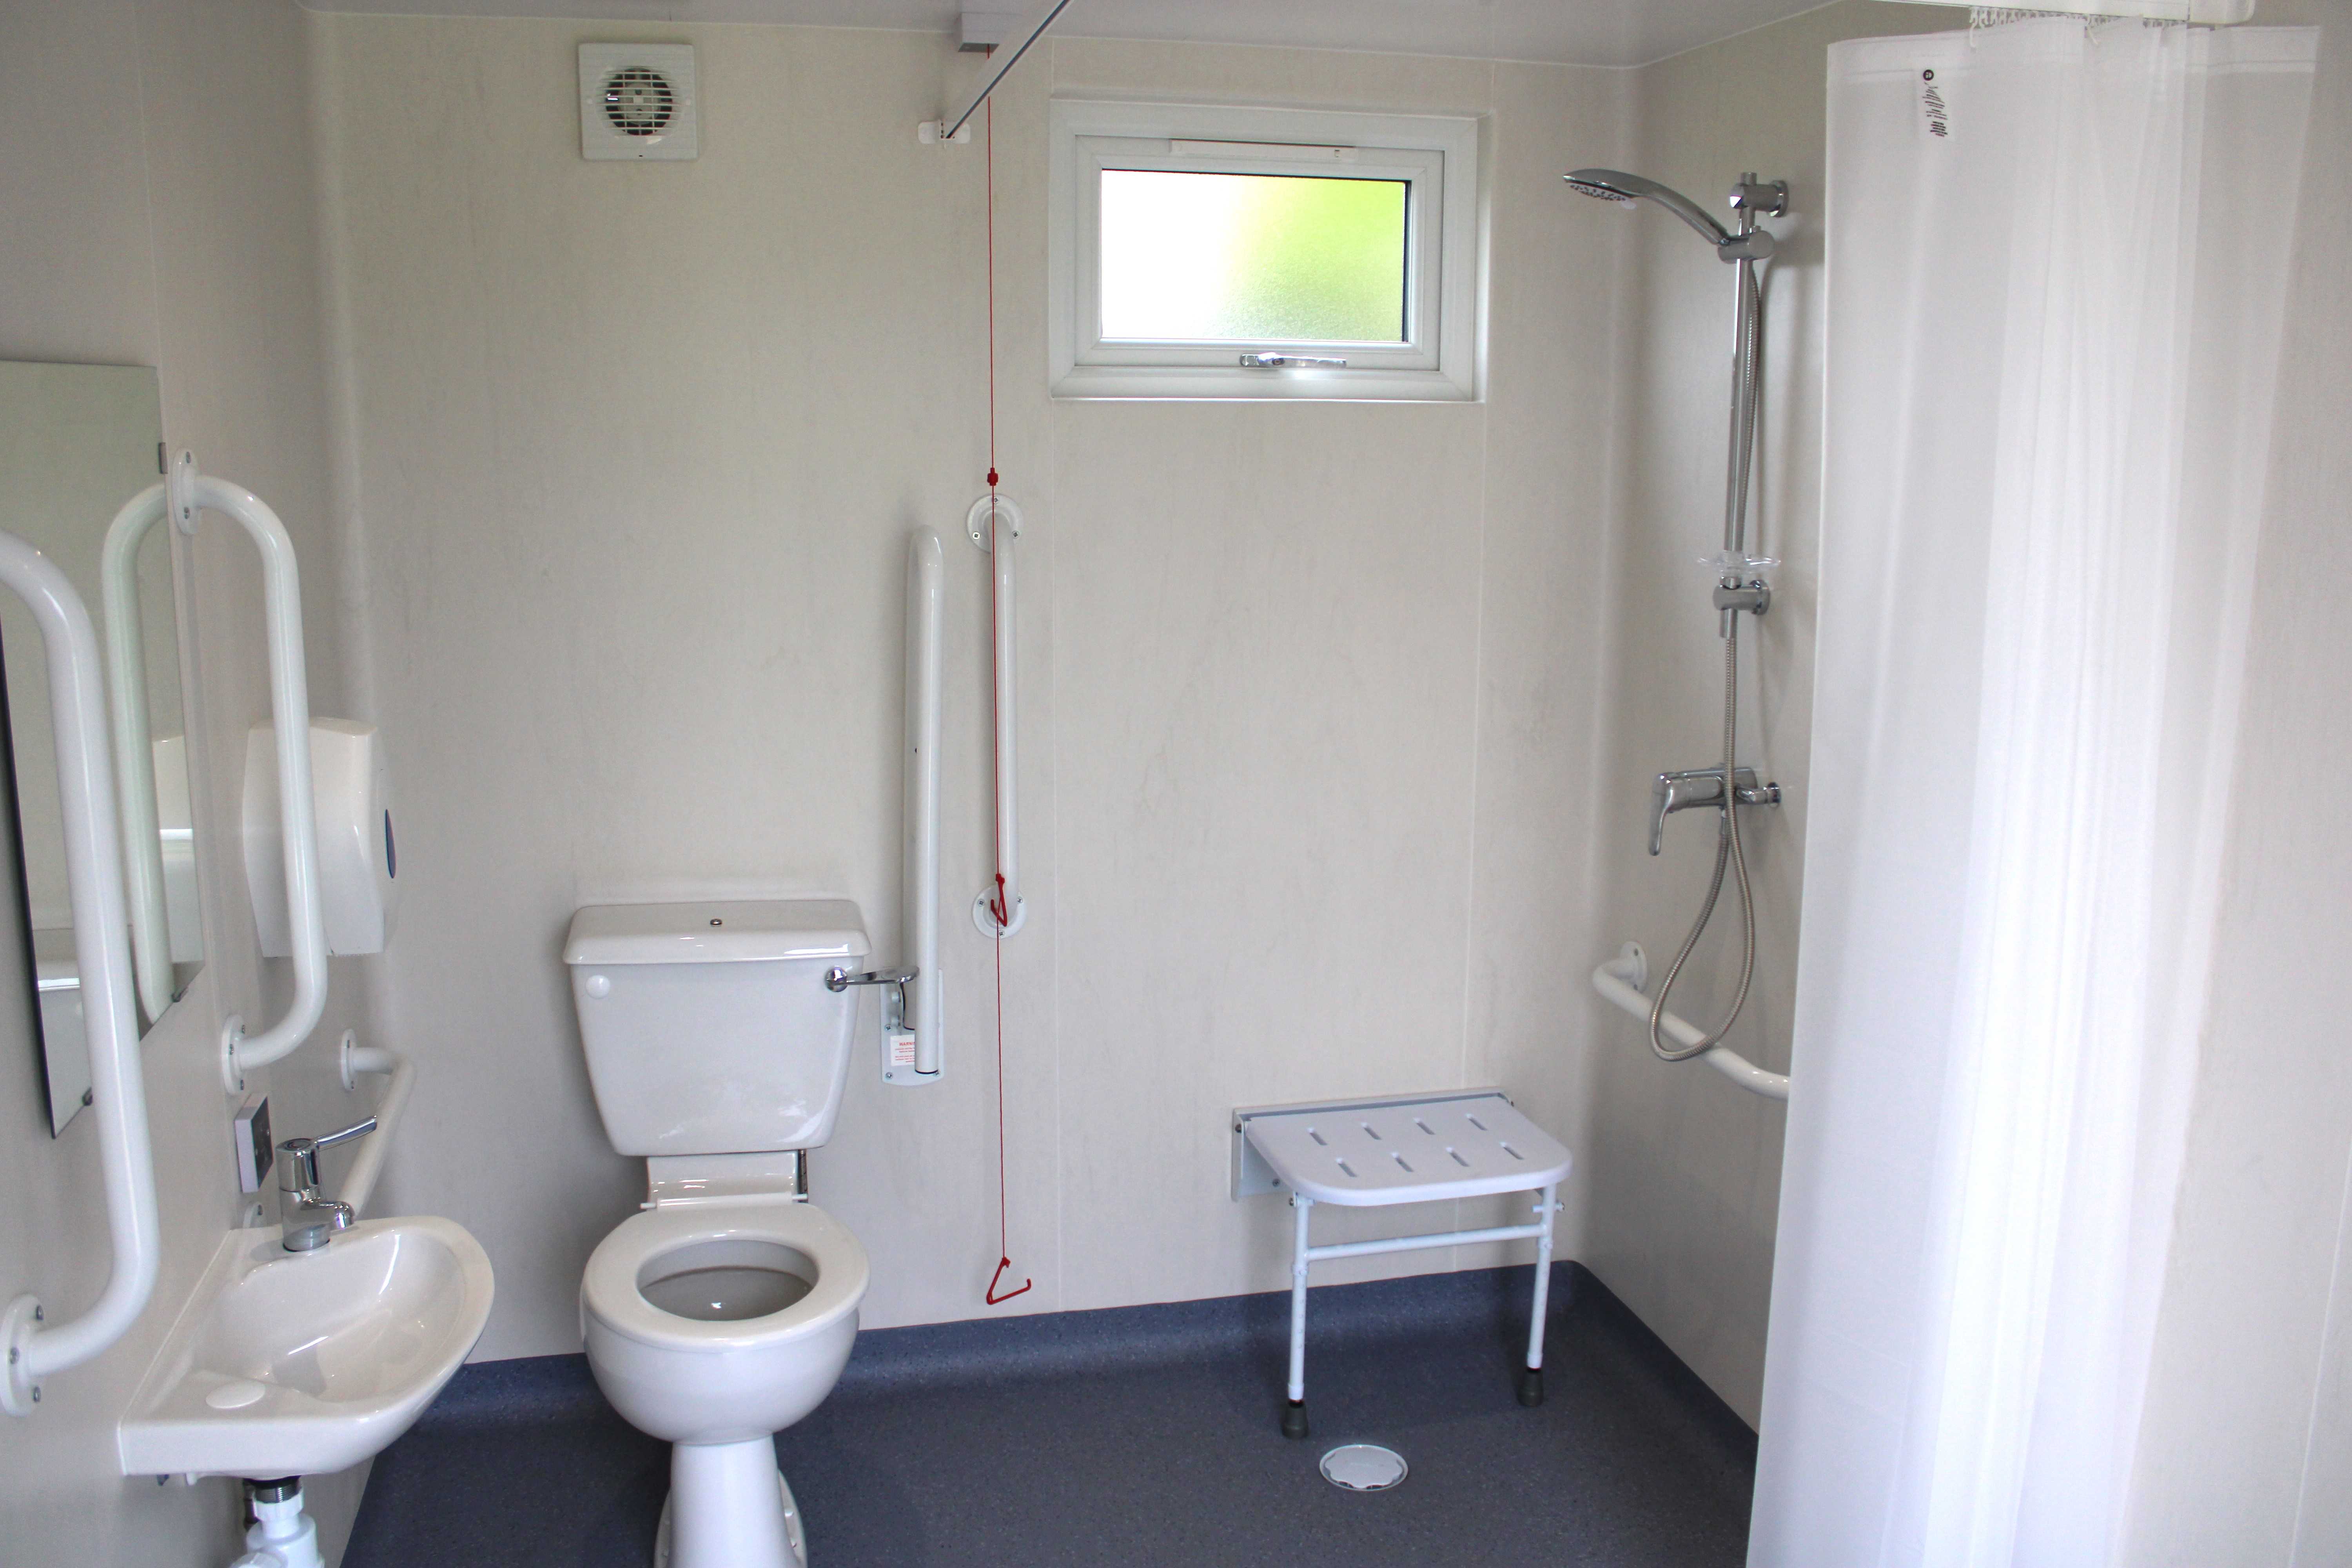 Image of a wheelchair accessible bathroom, with a show and shower chair, and the shower curtain is open